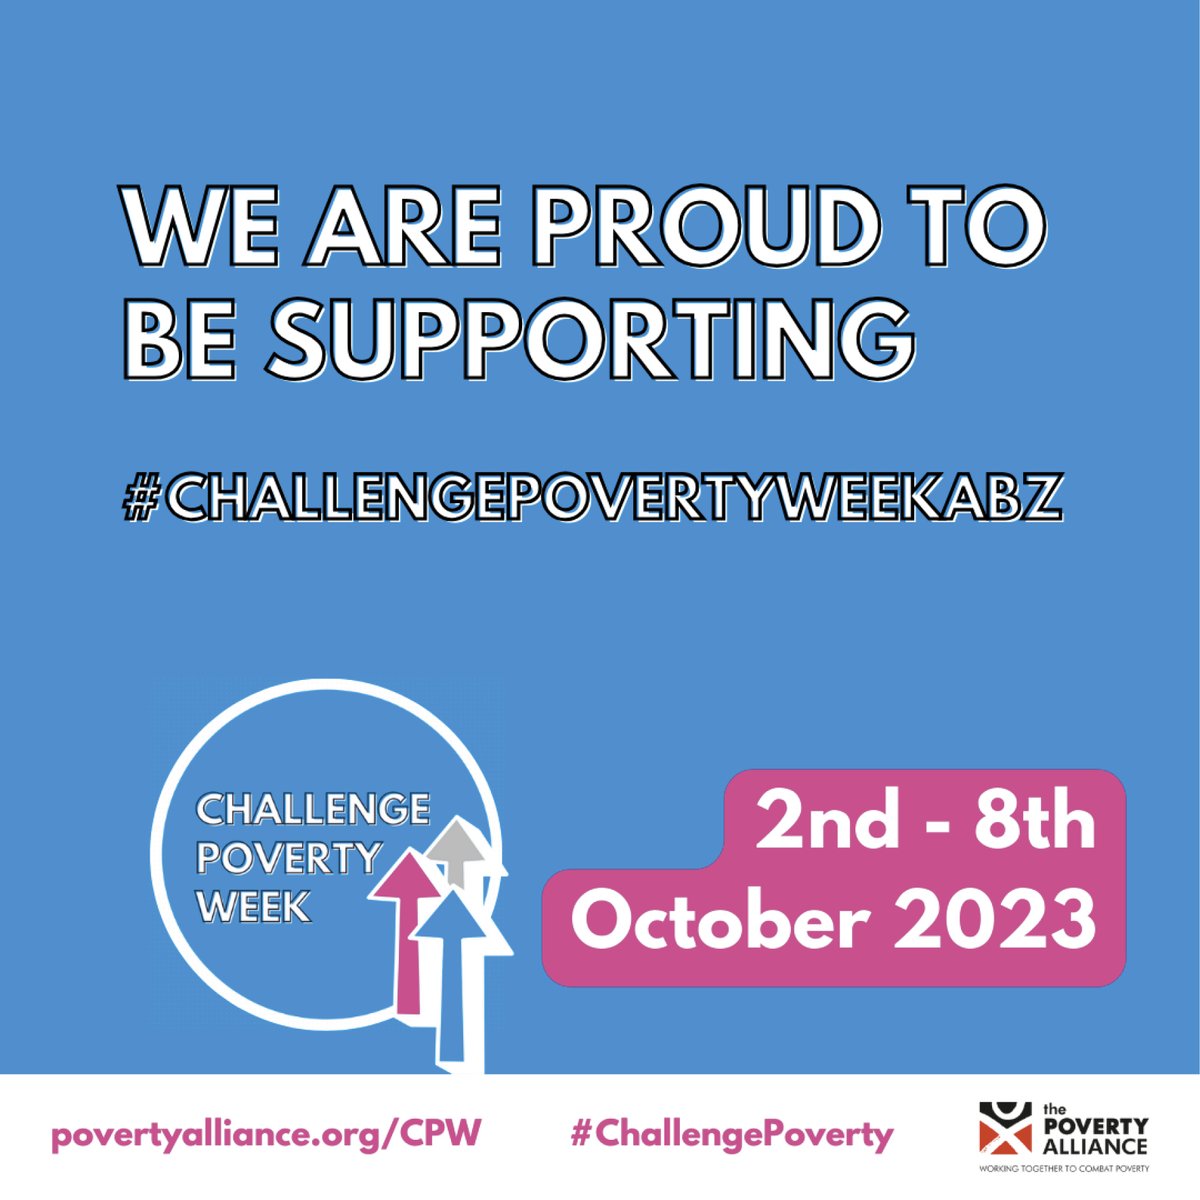 We’re proud to be supporting Challenge Poverty Week (2nd – 8th October). Join in and find out what is happening in Aberdeen to create a just and equal society for all #ChallengePovertyWeekABZ #CPWABZ @shmuORG @CFINEAberdeen @Abdn_Cyrenians @HSCAberdeen @PovertyAlliance